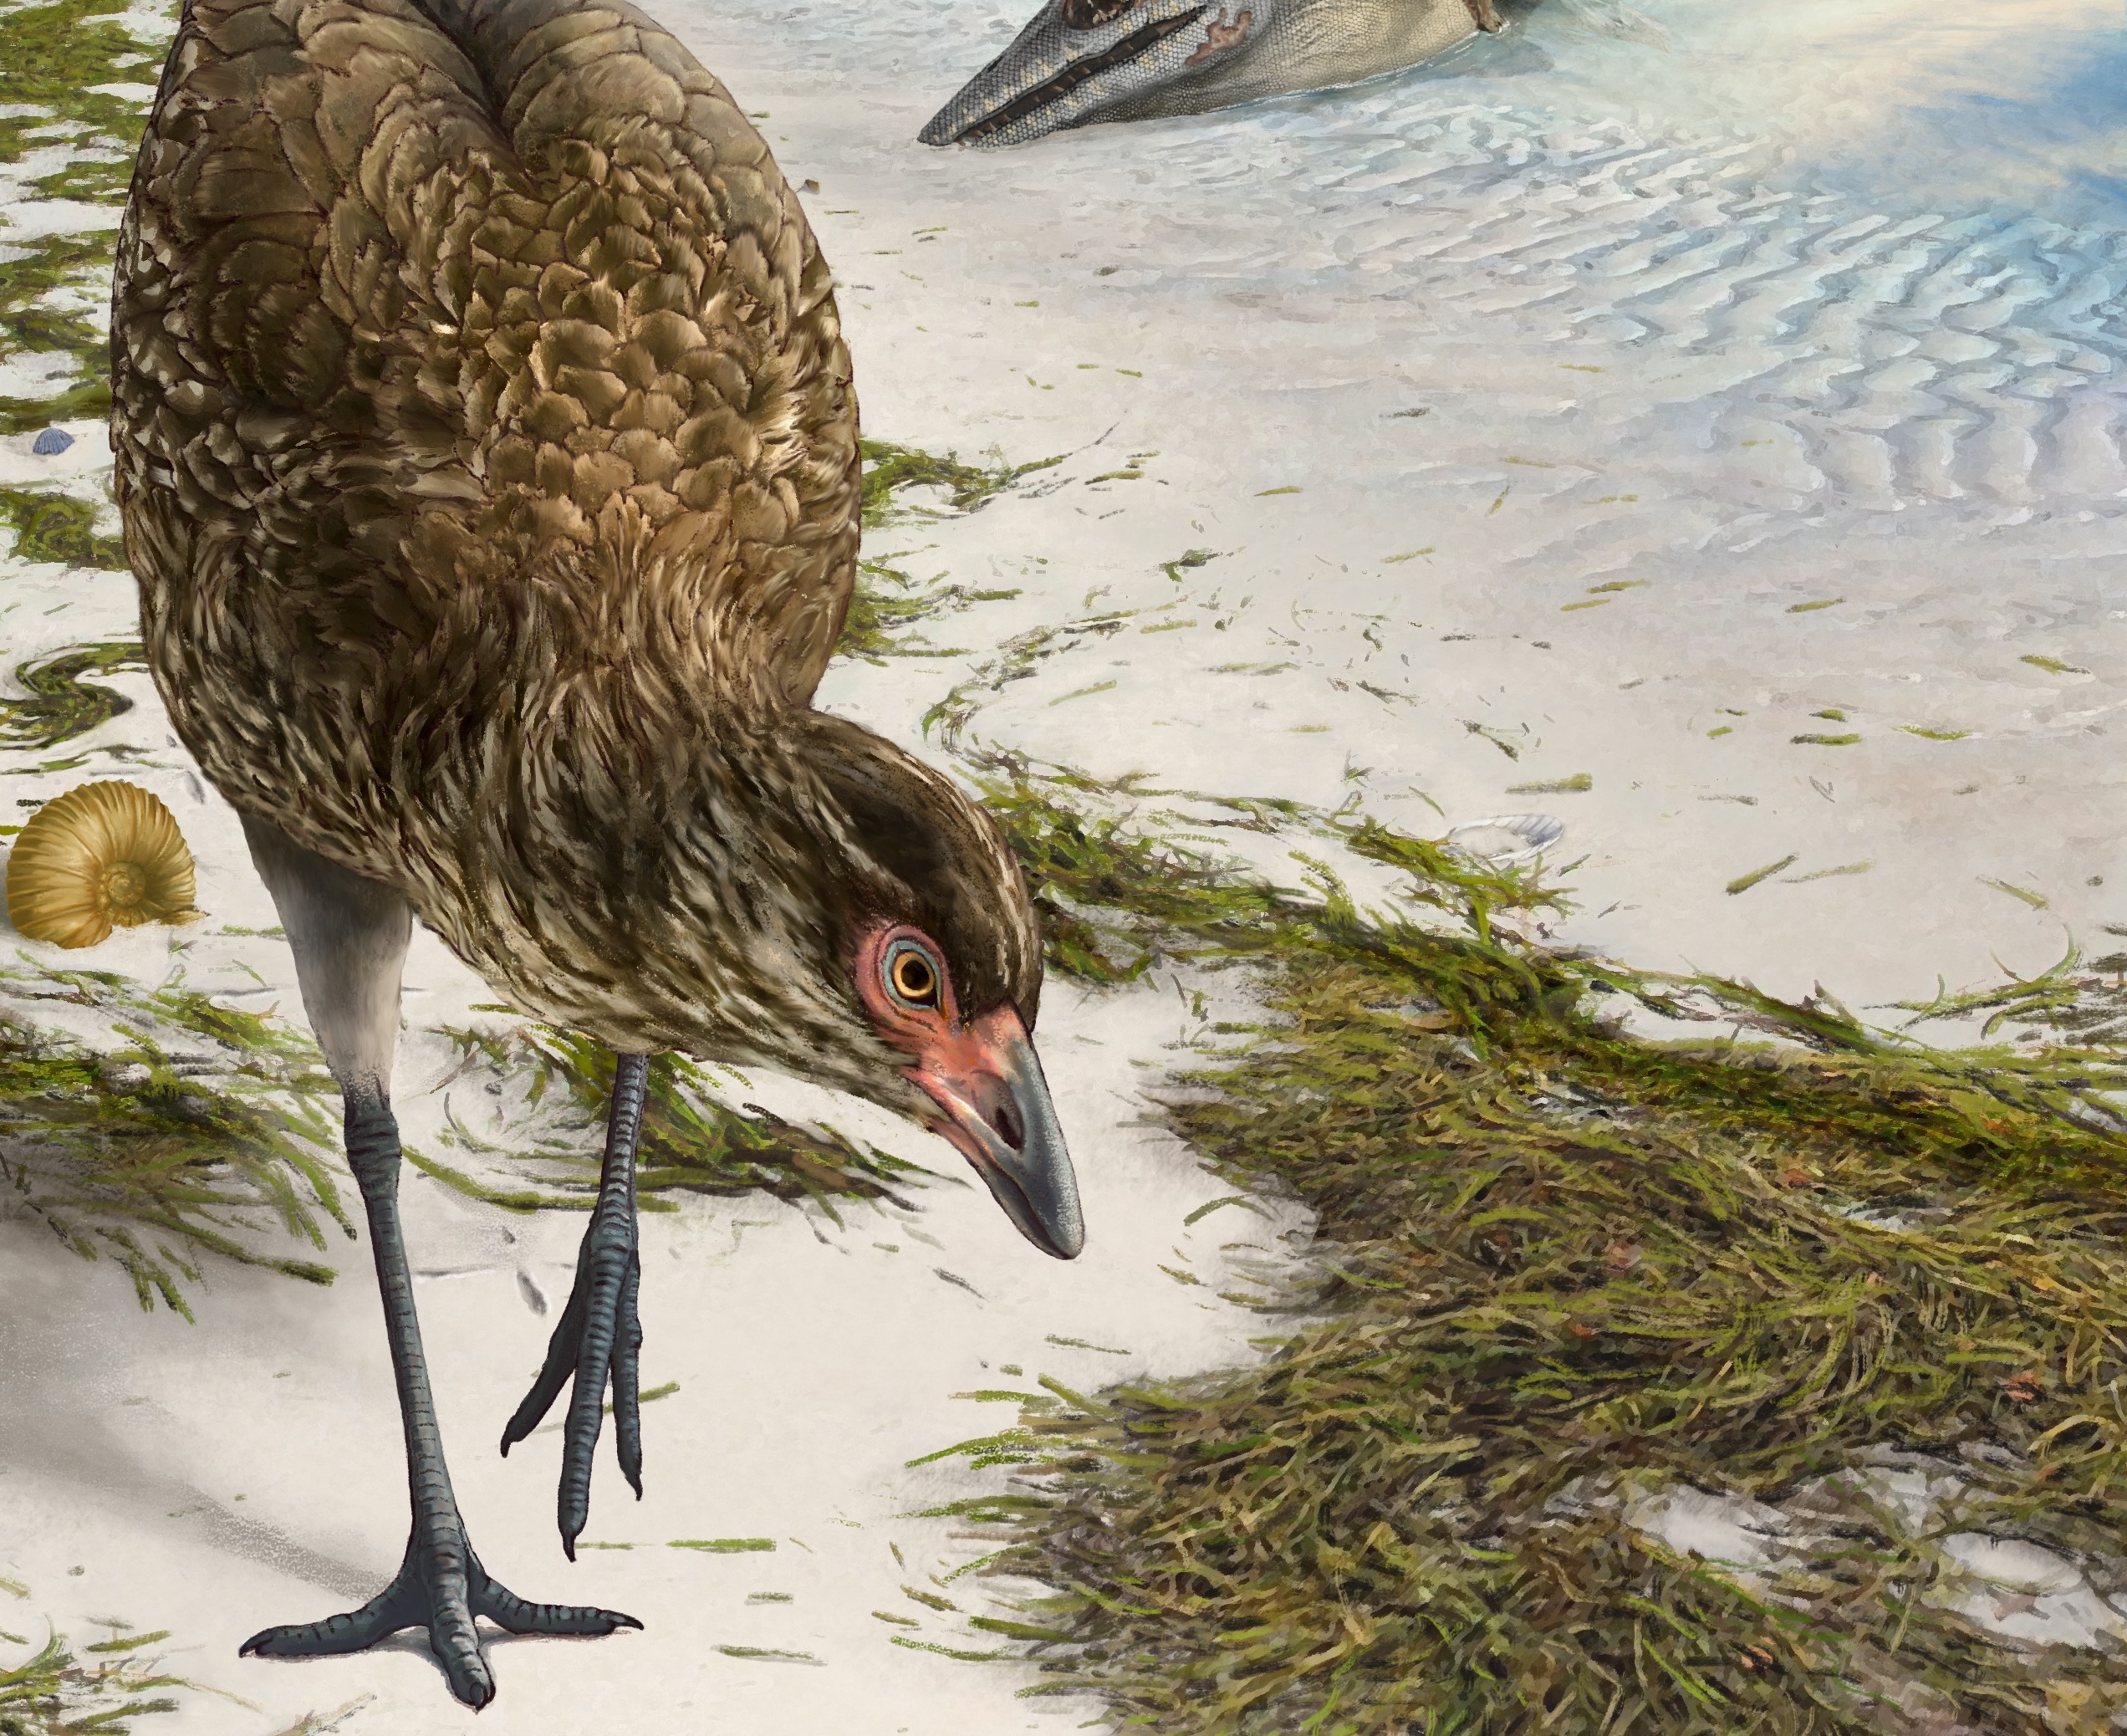 Wonderchicken ecosystem: Artist’s reconstruction of the world’s oldest modern bird, Asteriornis maastrichtensis, in its original environment. 66.7 million years ago parts of Belgium were covered by a shallow sea, and conditions were similar to modern tropical beaches like The Bahamas. Asteriornis lived at the end of the Age of Dinosaurs, a time when mosasaurs (giant marine reptiles) swam in the oceans, and Tyrannosaurus rex lived on land. Asteriornis had fairly long legs and may have prowled the tropical shoreline. Credit: Phillip Krzeminski